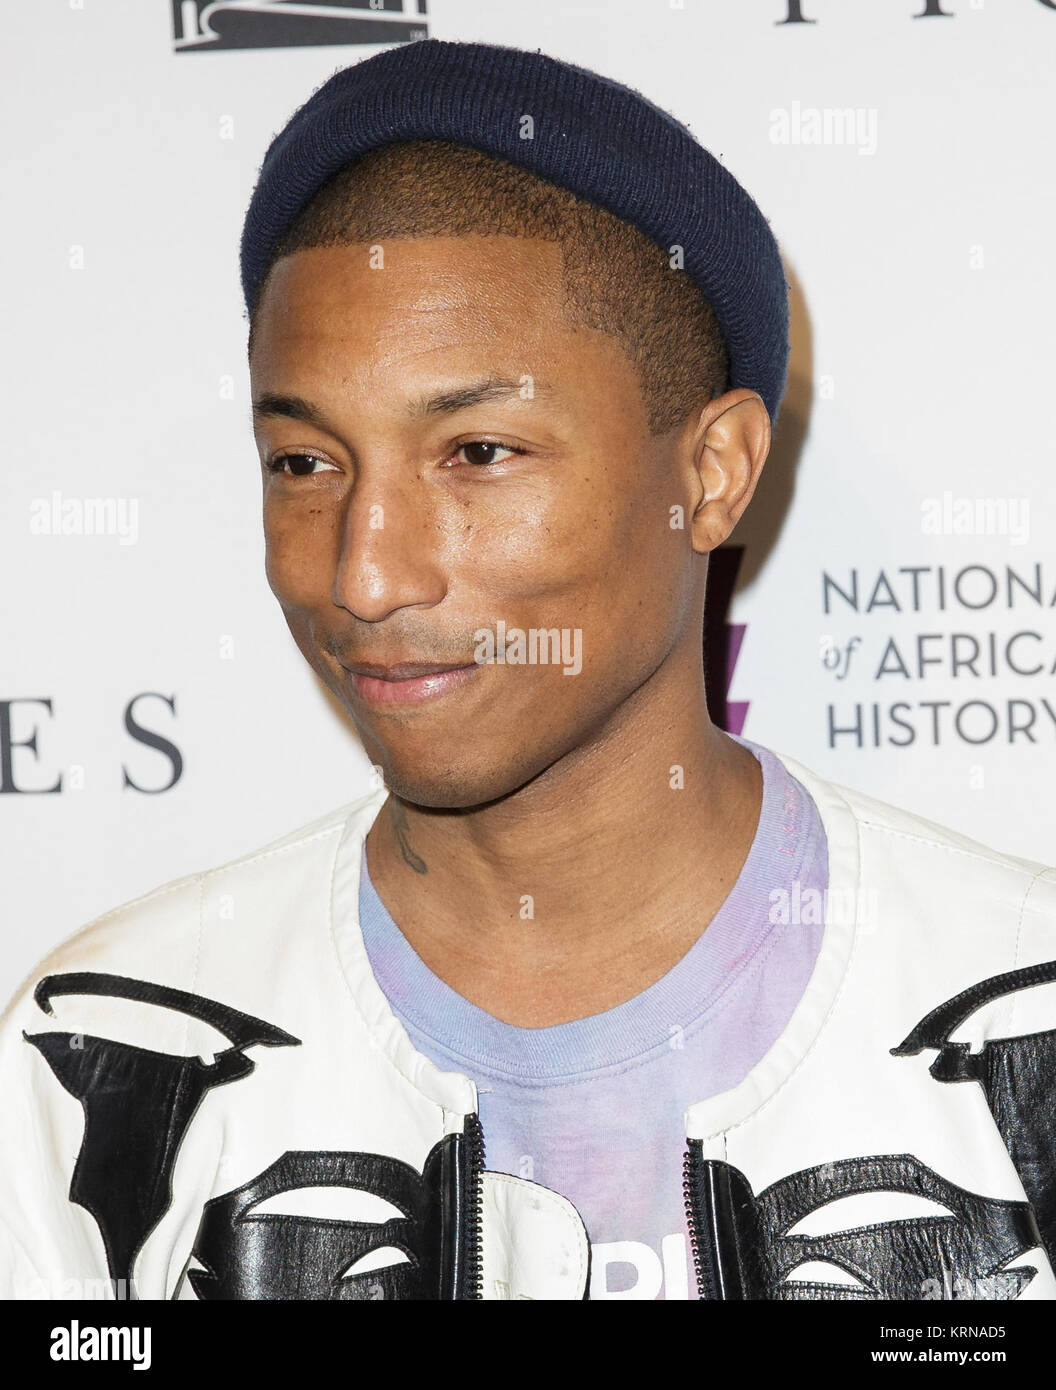 American singer-songwriter Pharrell Williams arrives on the red carpet for a screening of the film “Hidden Figures” at the Smithsonian’s National Museum of African American History and Culture, Wednesday, Dec. 14, 2016 in Washington DC. The film is based on the book of the same title, by Margot Lee Shetterly, and chronicles the lives of Katherine Johnson, Dorothy Vaughan and Mary Jackson -- African-American women working at NASA as “human computers,” who were critical to the success of John Glenn’s Friendship 7 mission in 1962. Photo Credit: (NASA/Joel Kowsky) 22Hidden Figures22 Screening at N Stock Photo